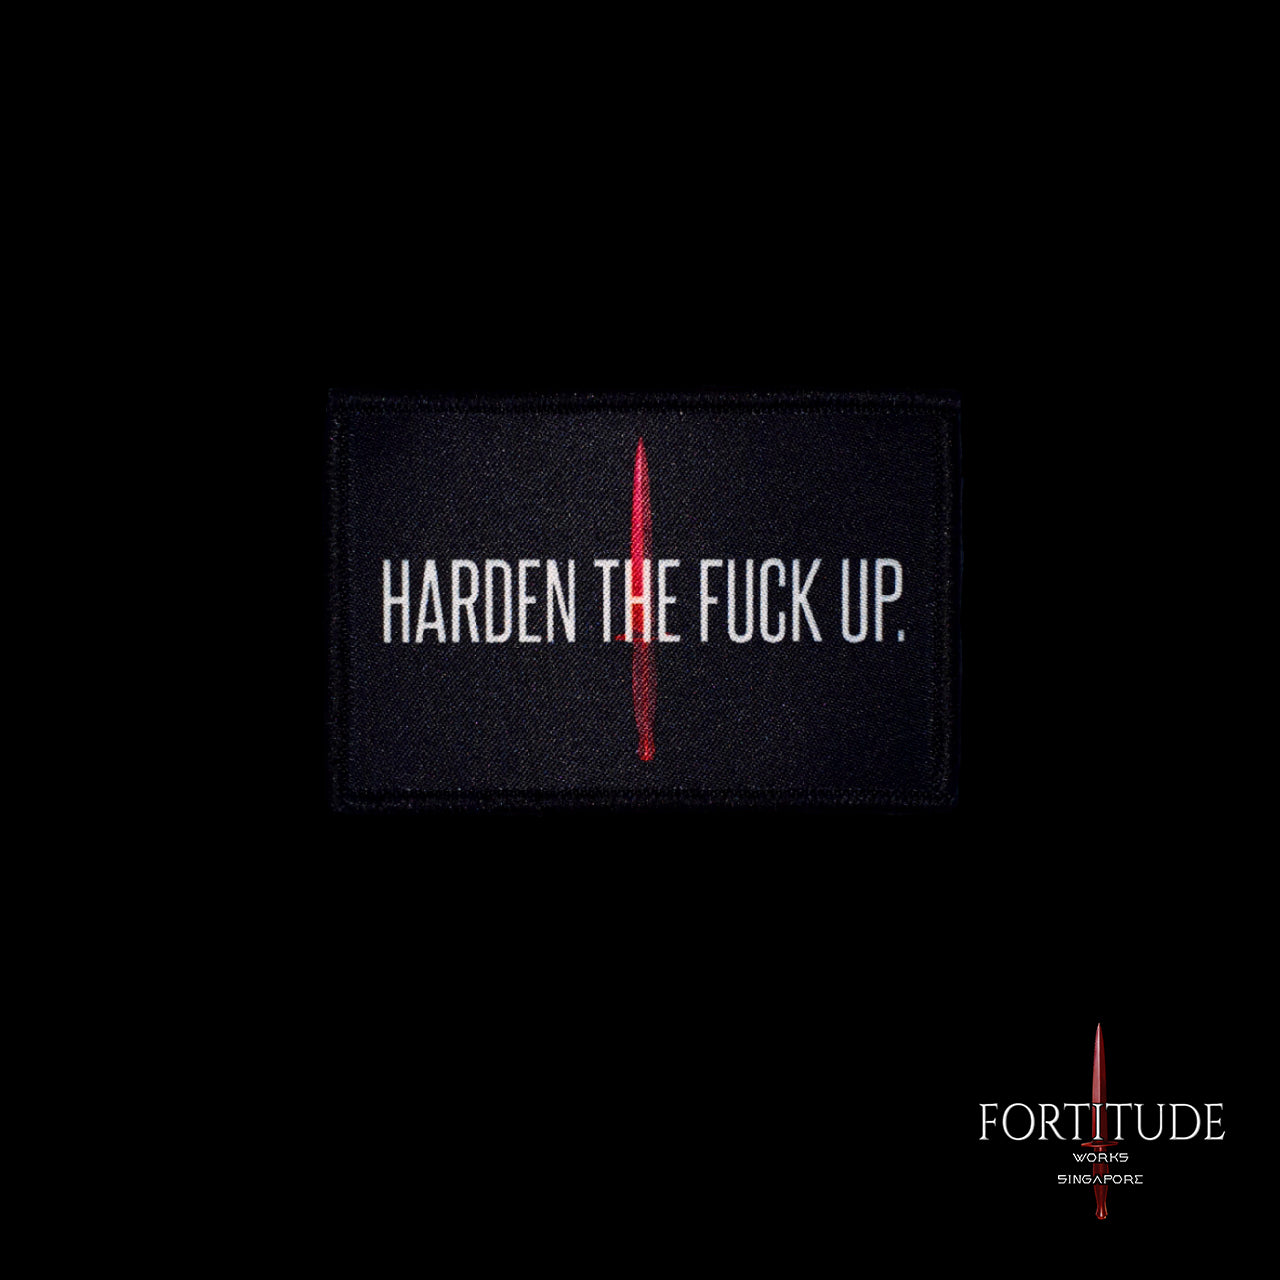 HARDEN THE FUCK UP - FORTITUDE WORKS SINGAPORE